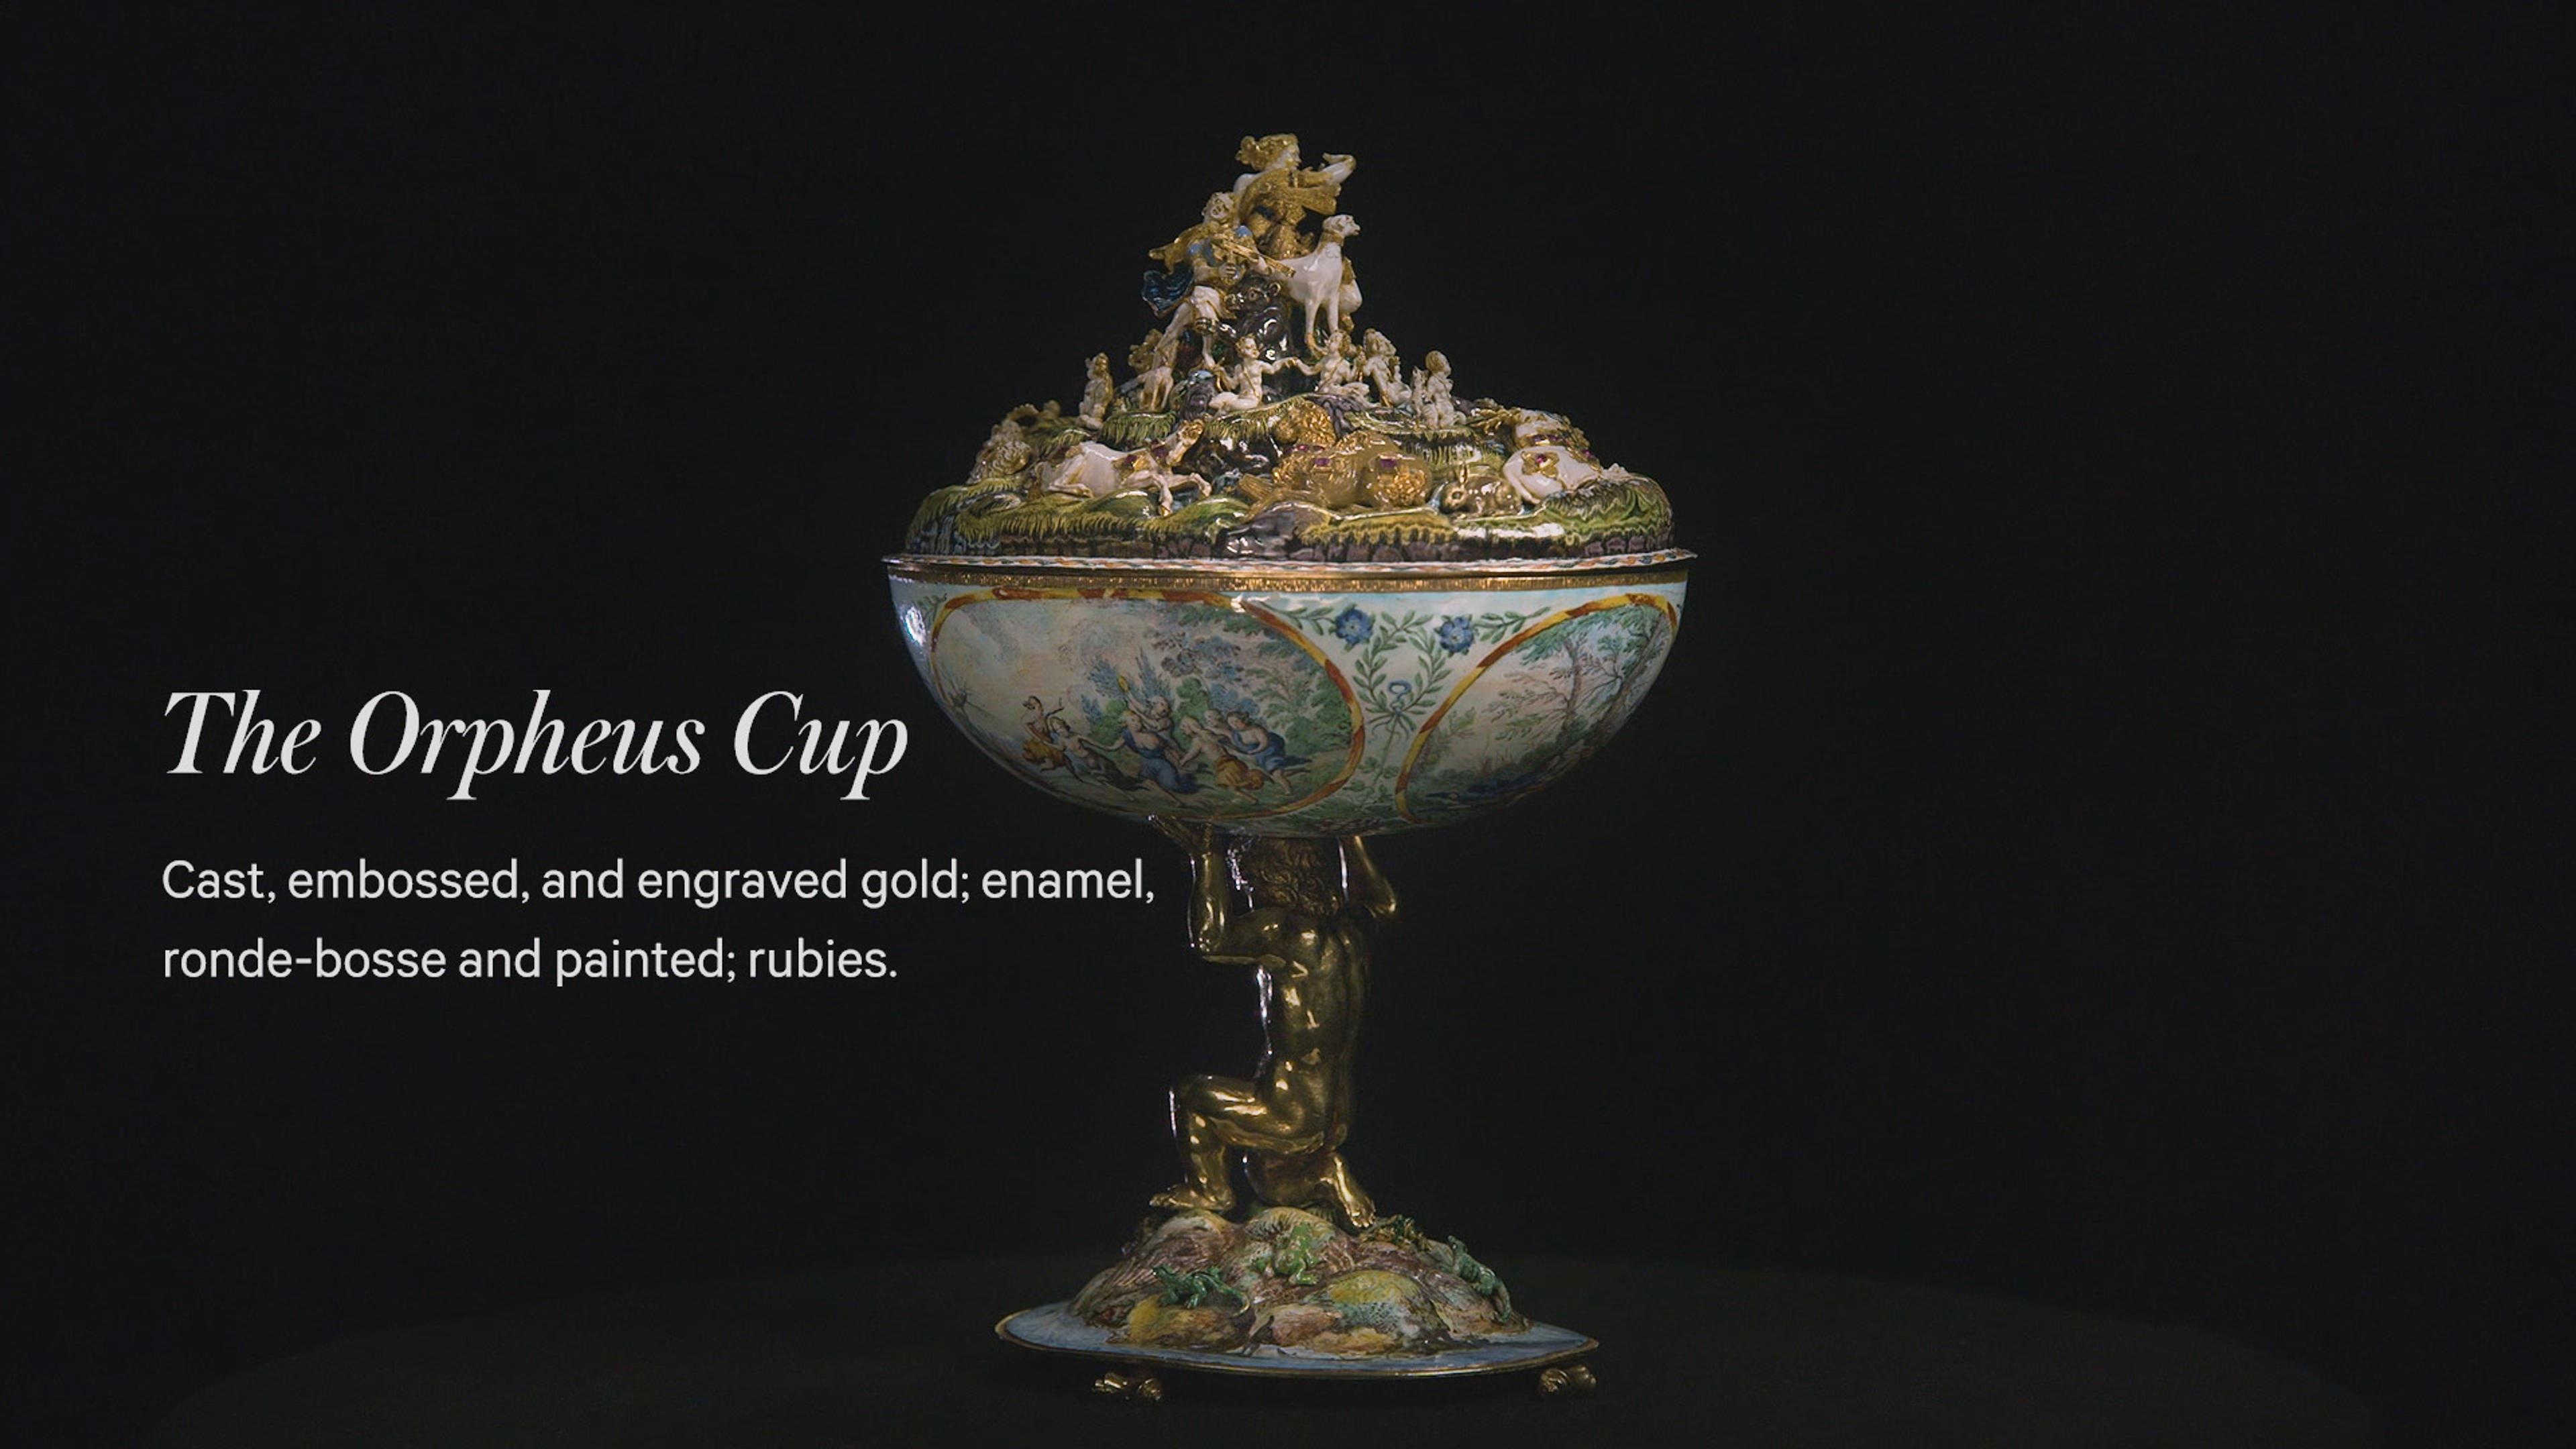 The Orpheus Cup